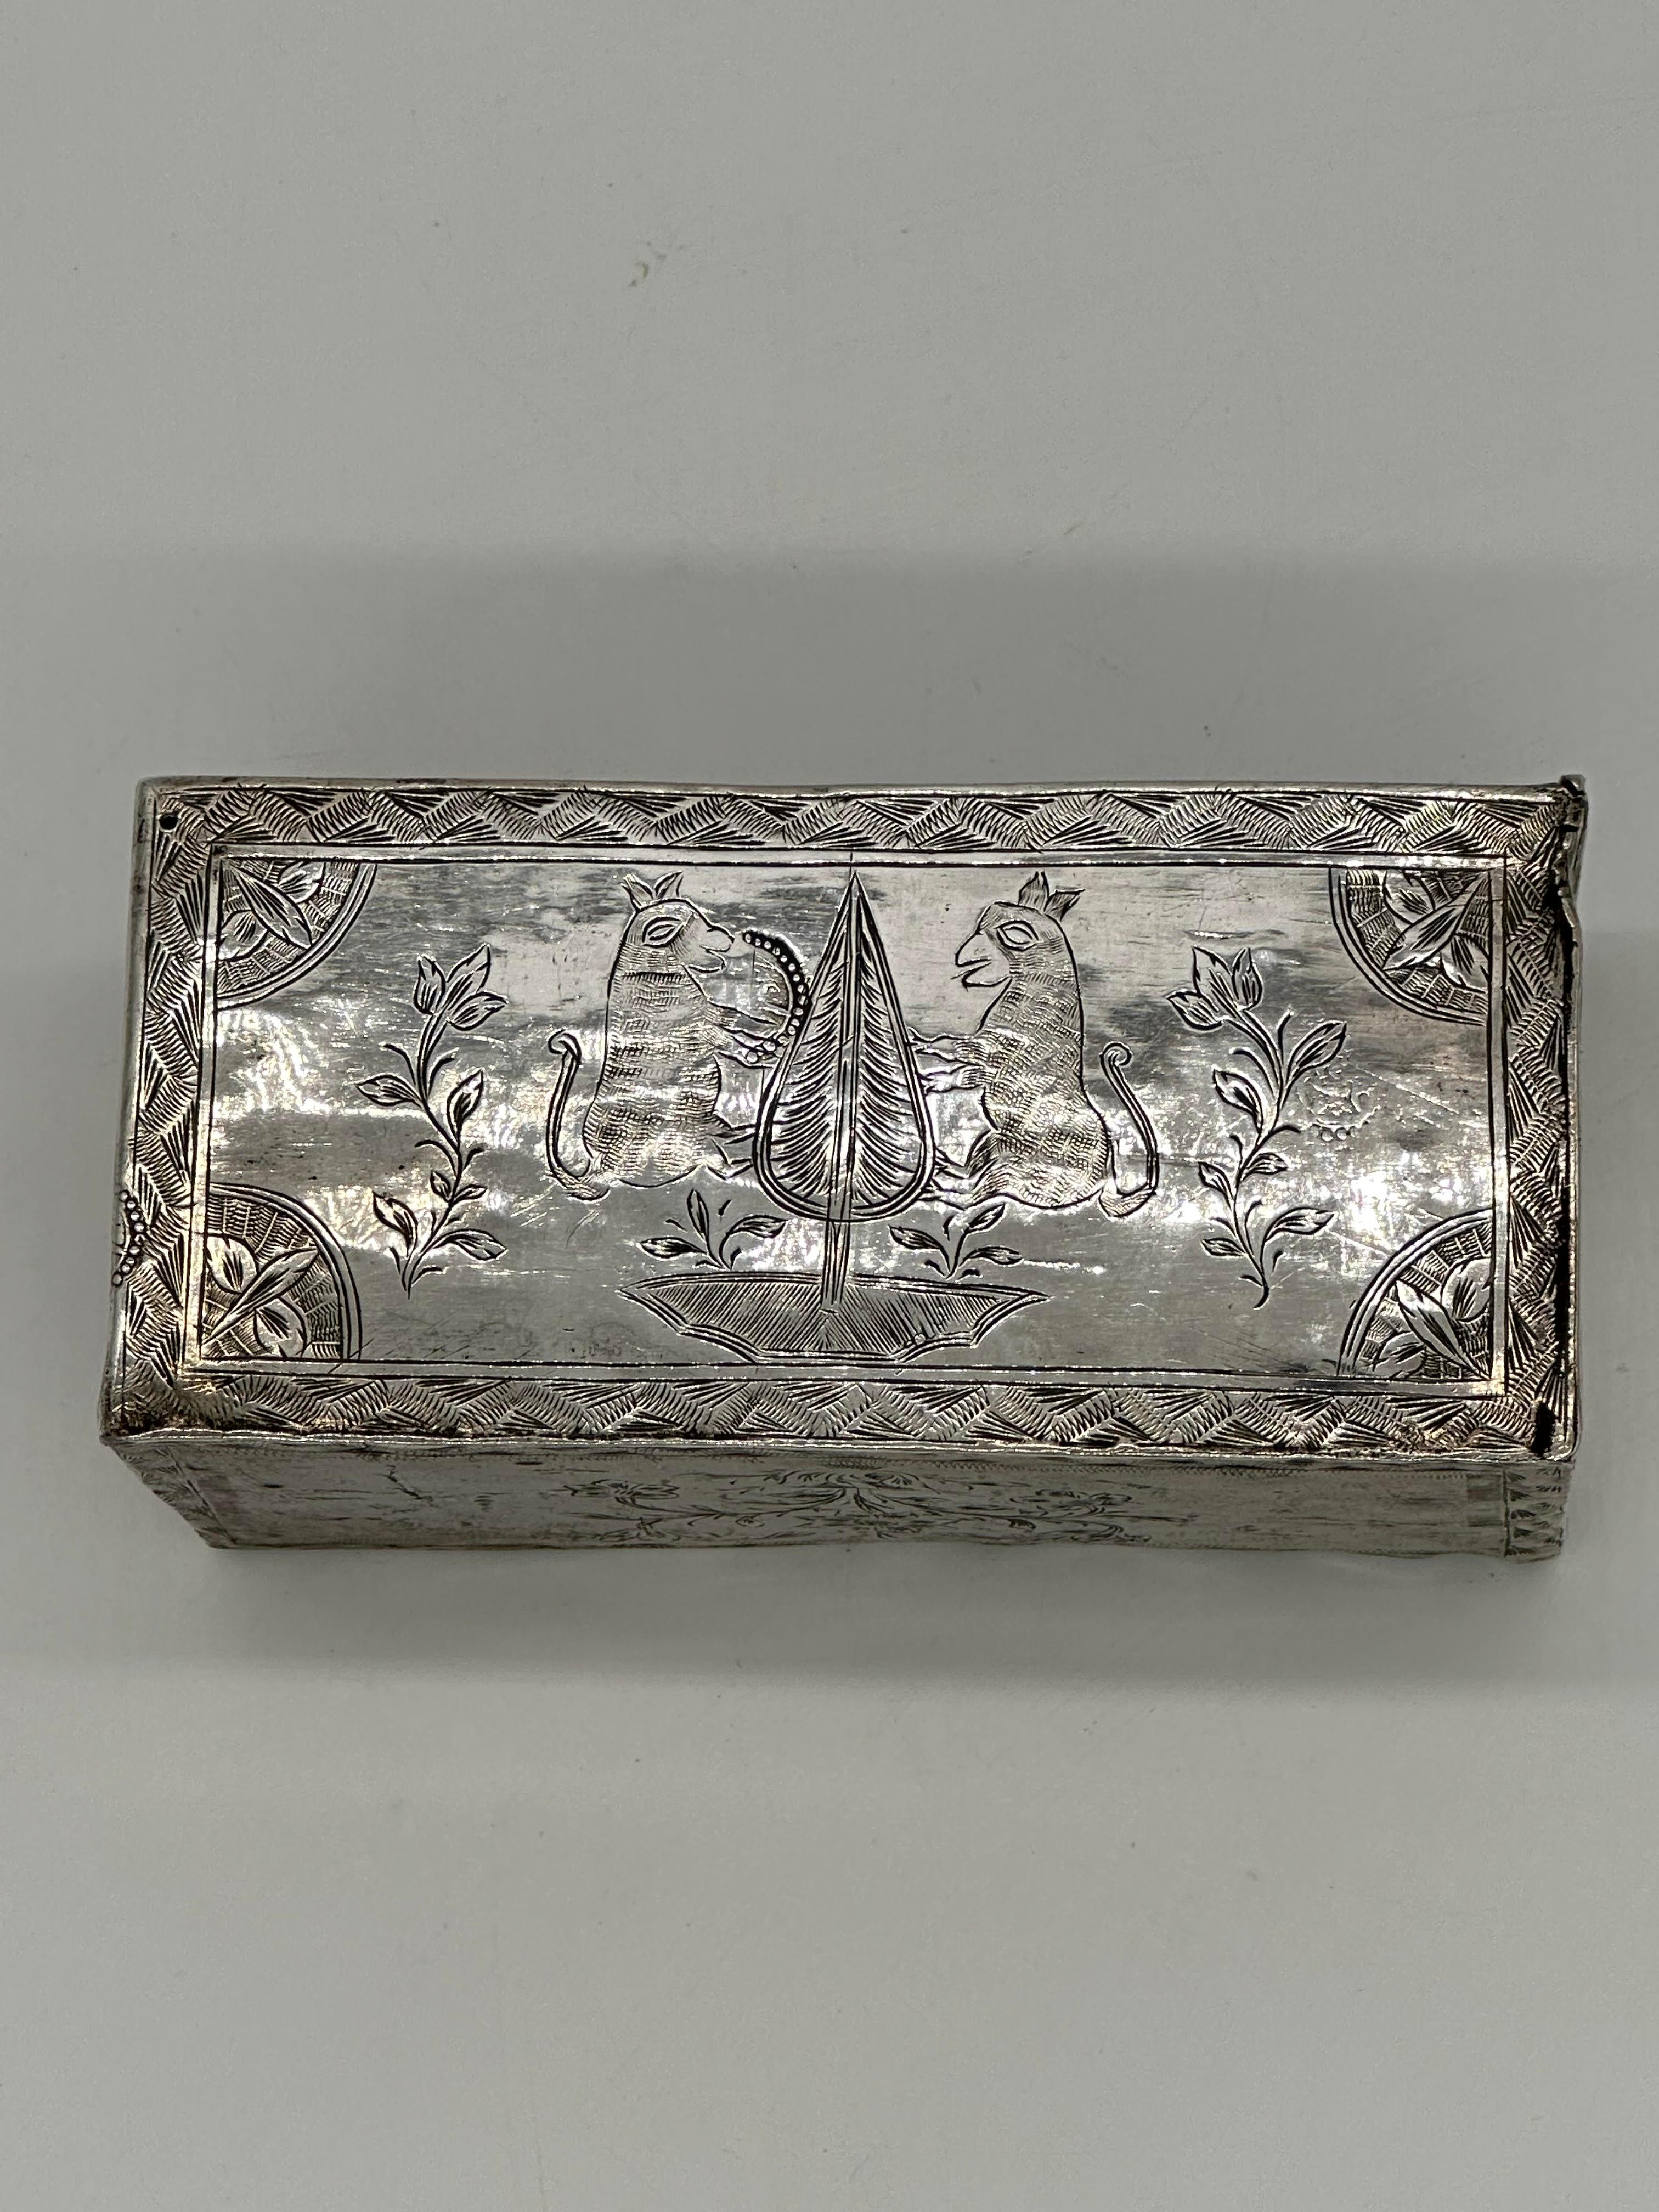 extremely rare Algerian Judaica silver, jewish Dowry box early 19th century For Sale 4